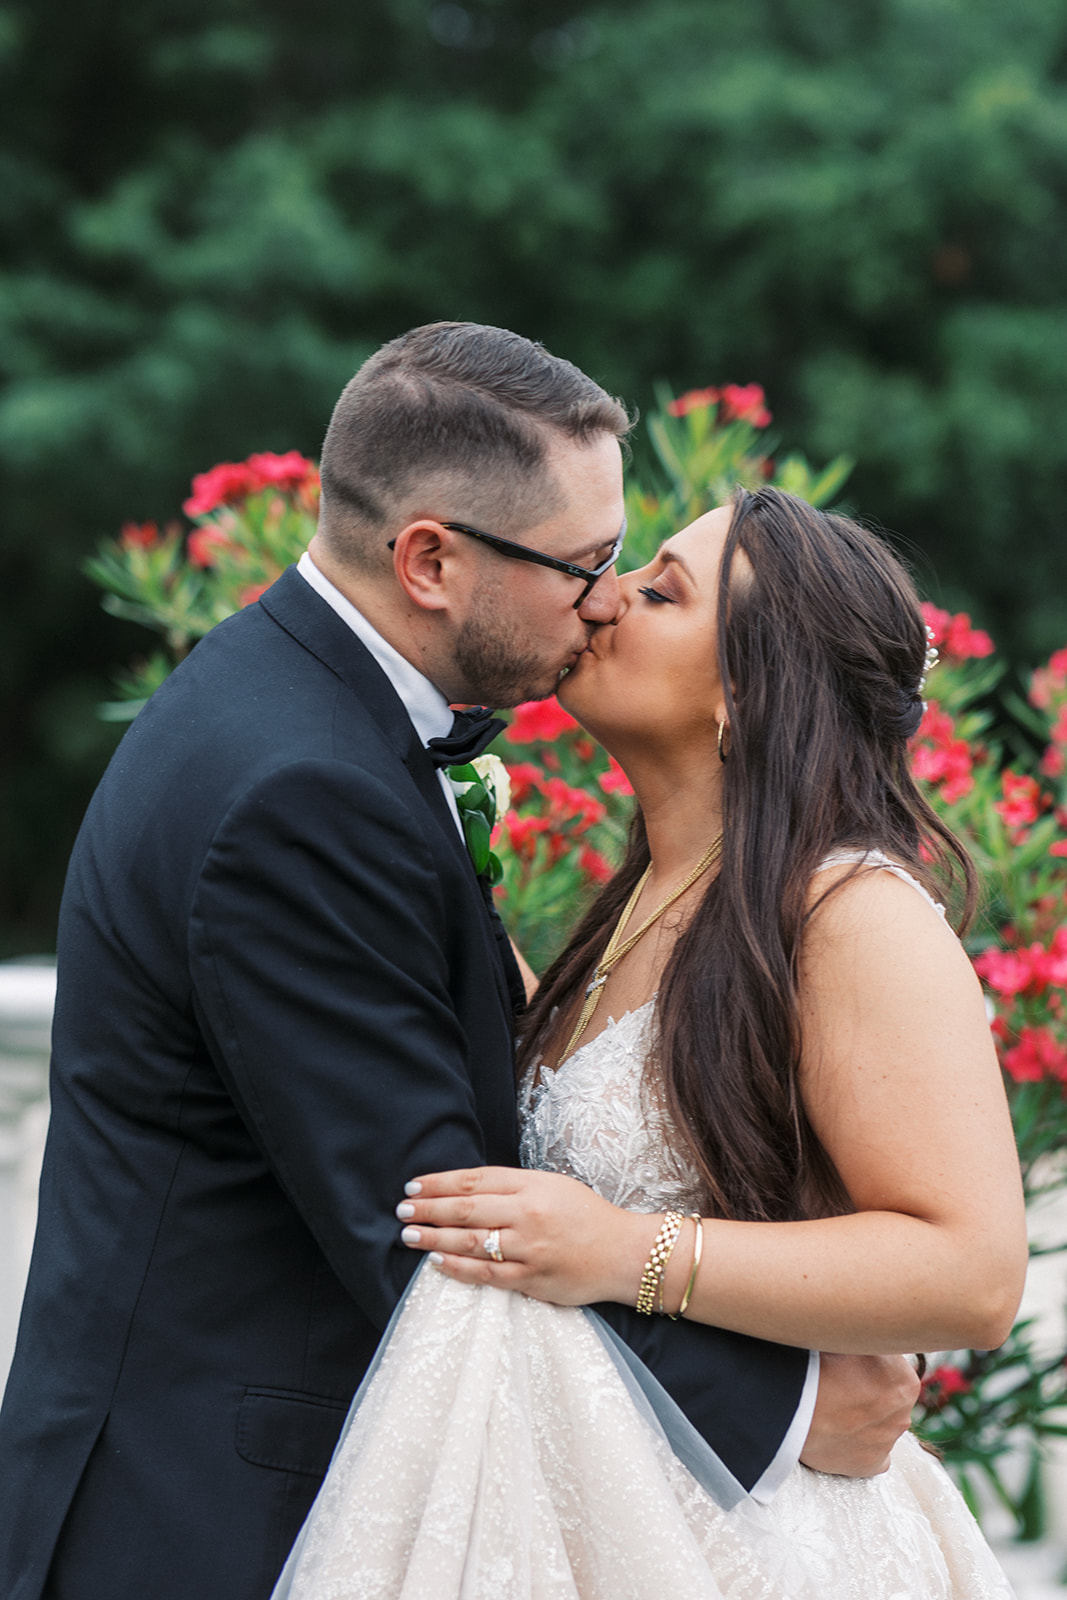 Newlyweds kiss in a garden terrace at the Villa Barone Hilltop Manor